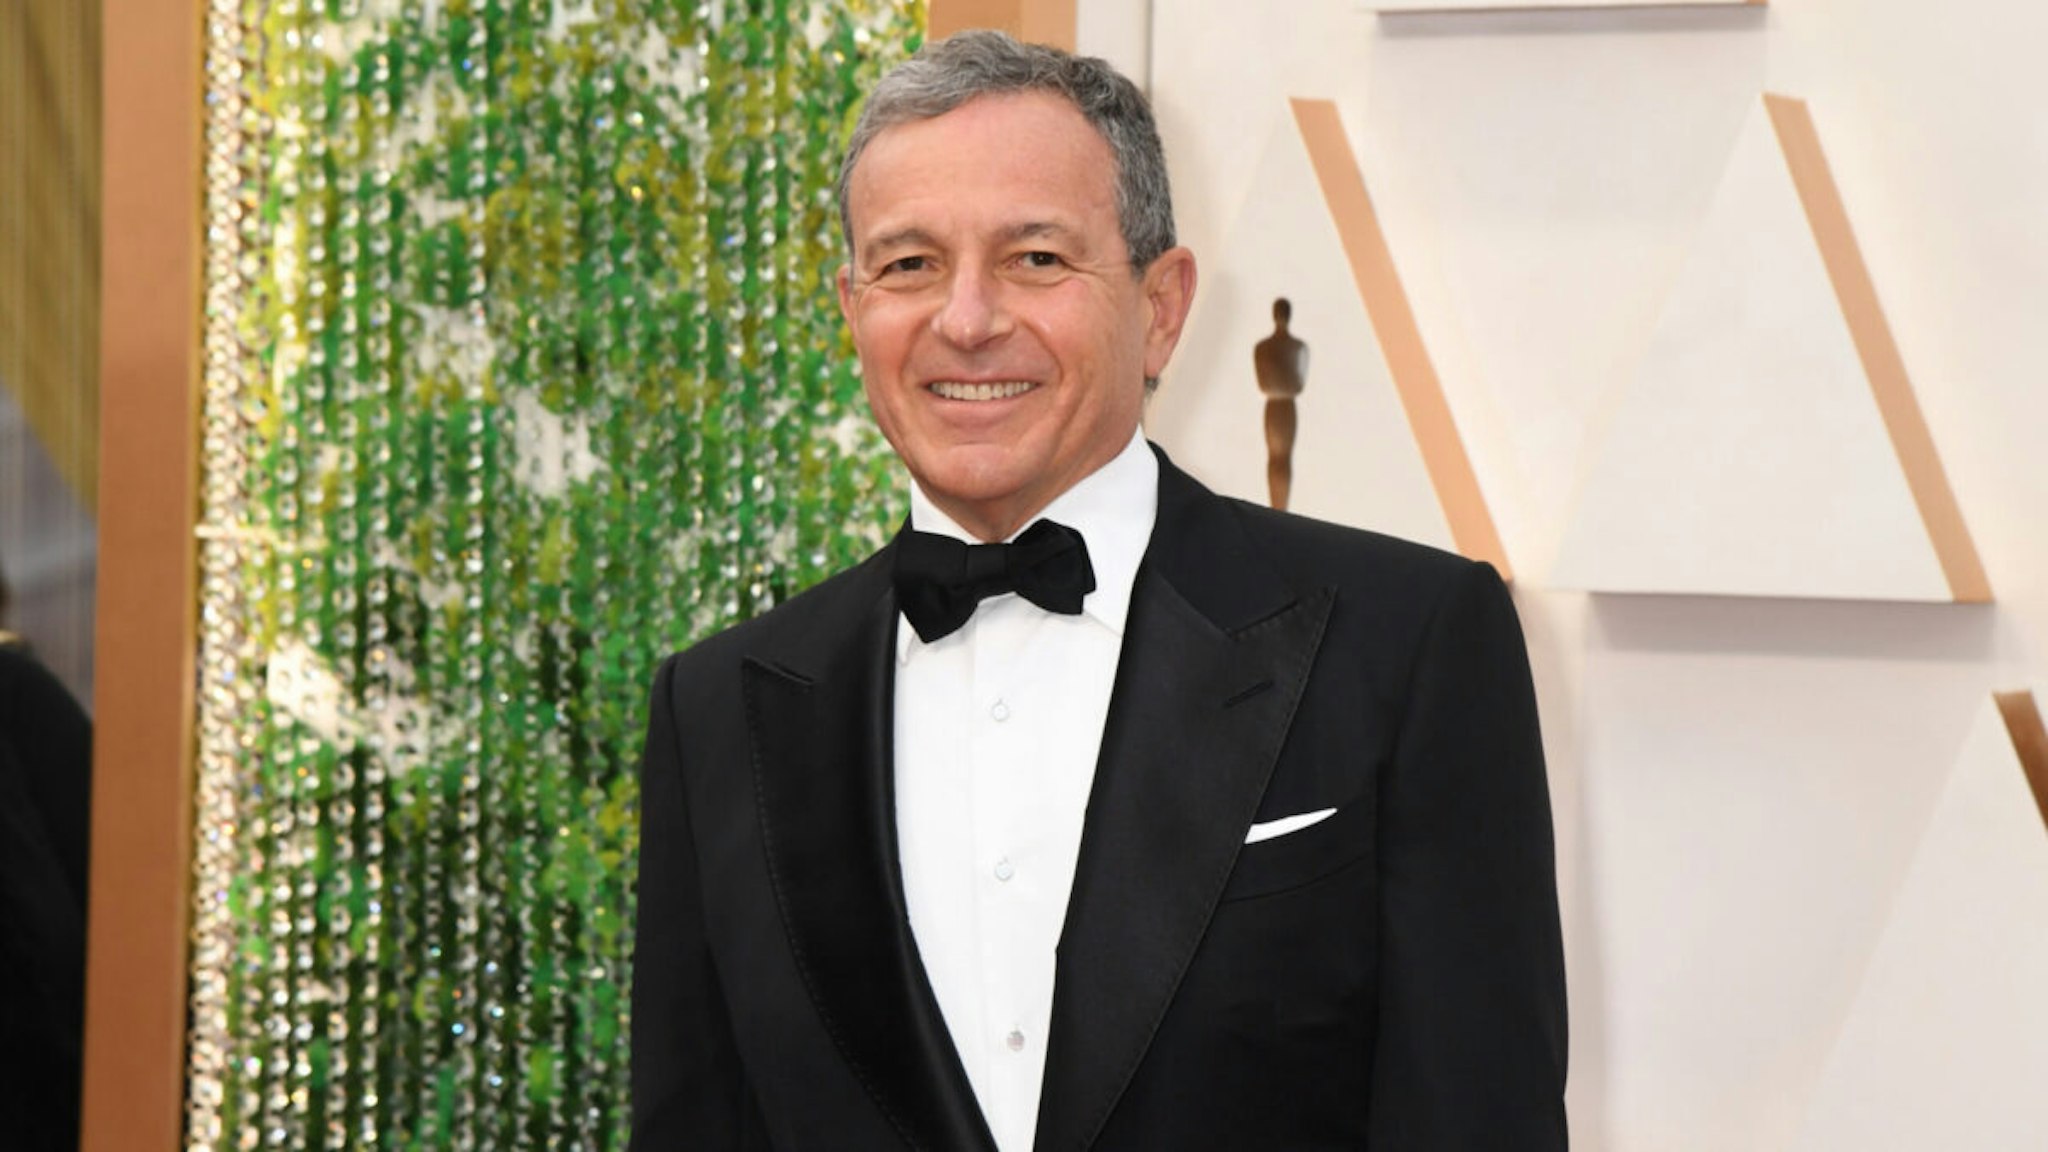 Disney CEO Bob Iger attends the 92nd Annual Academy Awards at Hollywood and Highland on February 09, 2020 in Hollywood, California.